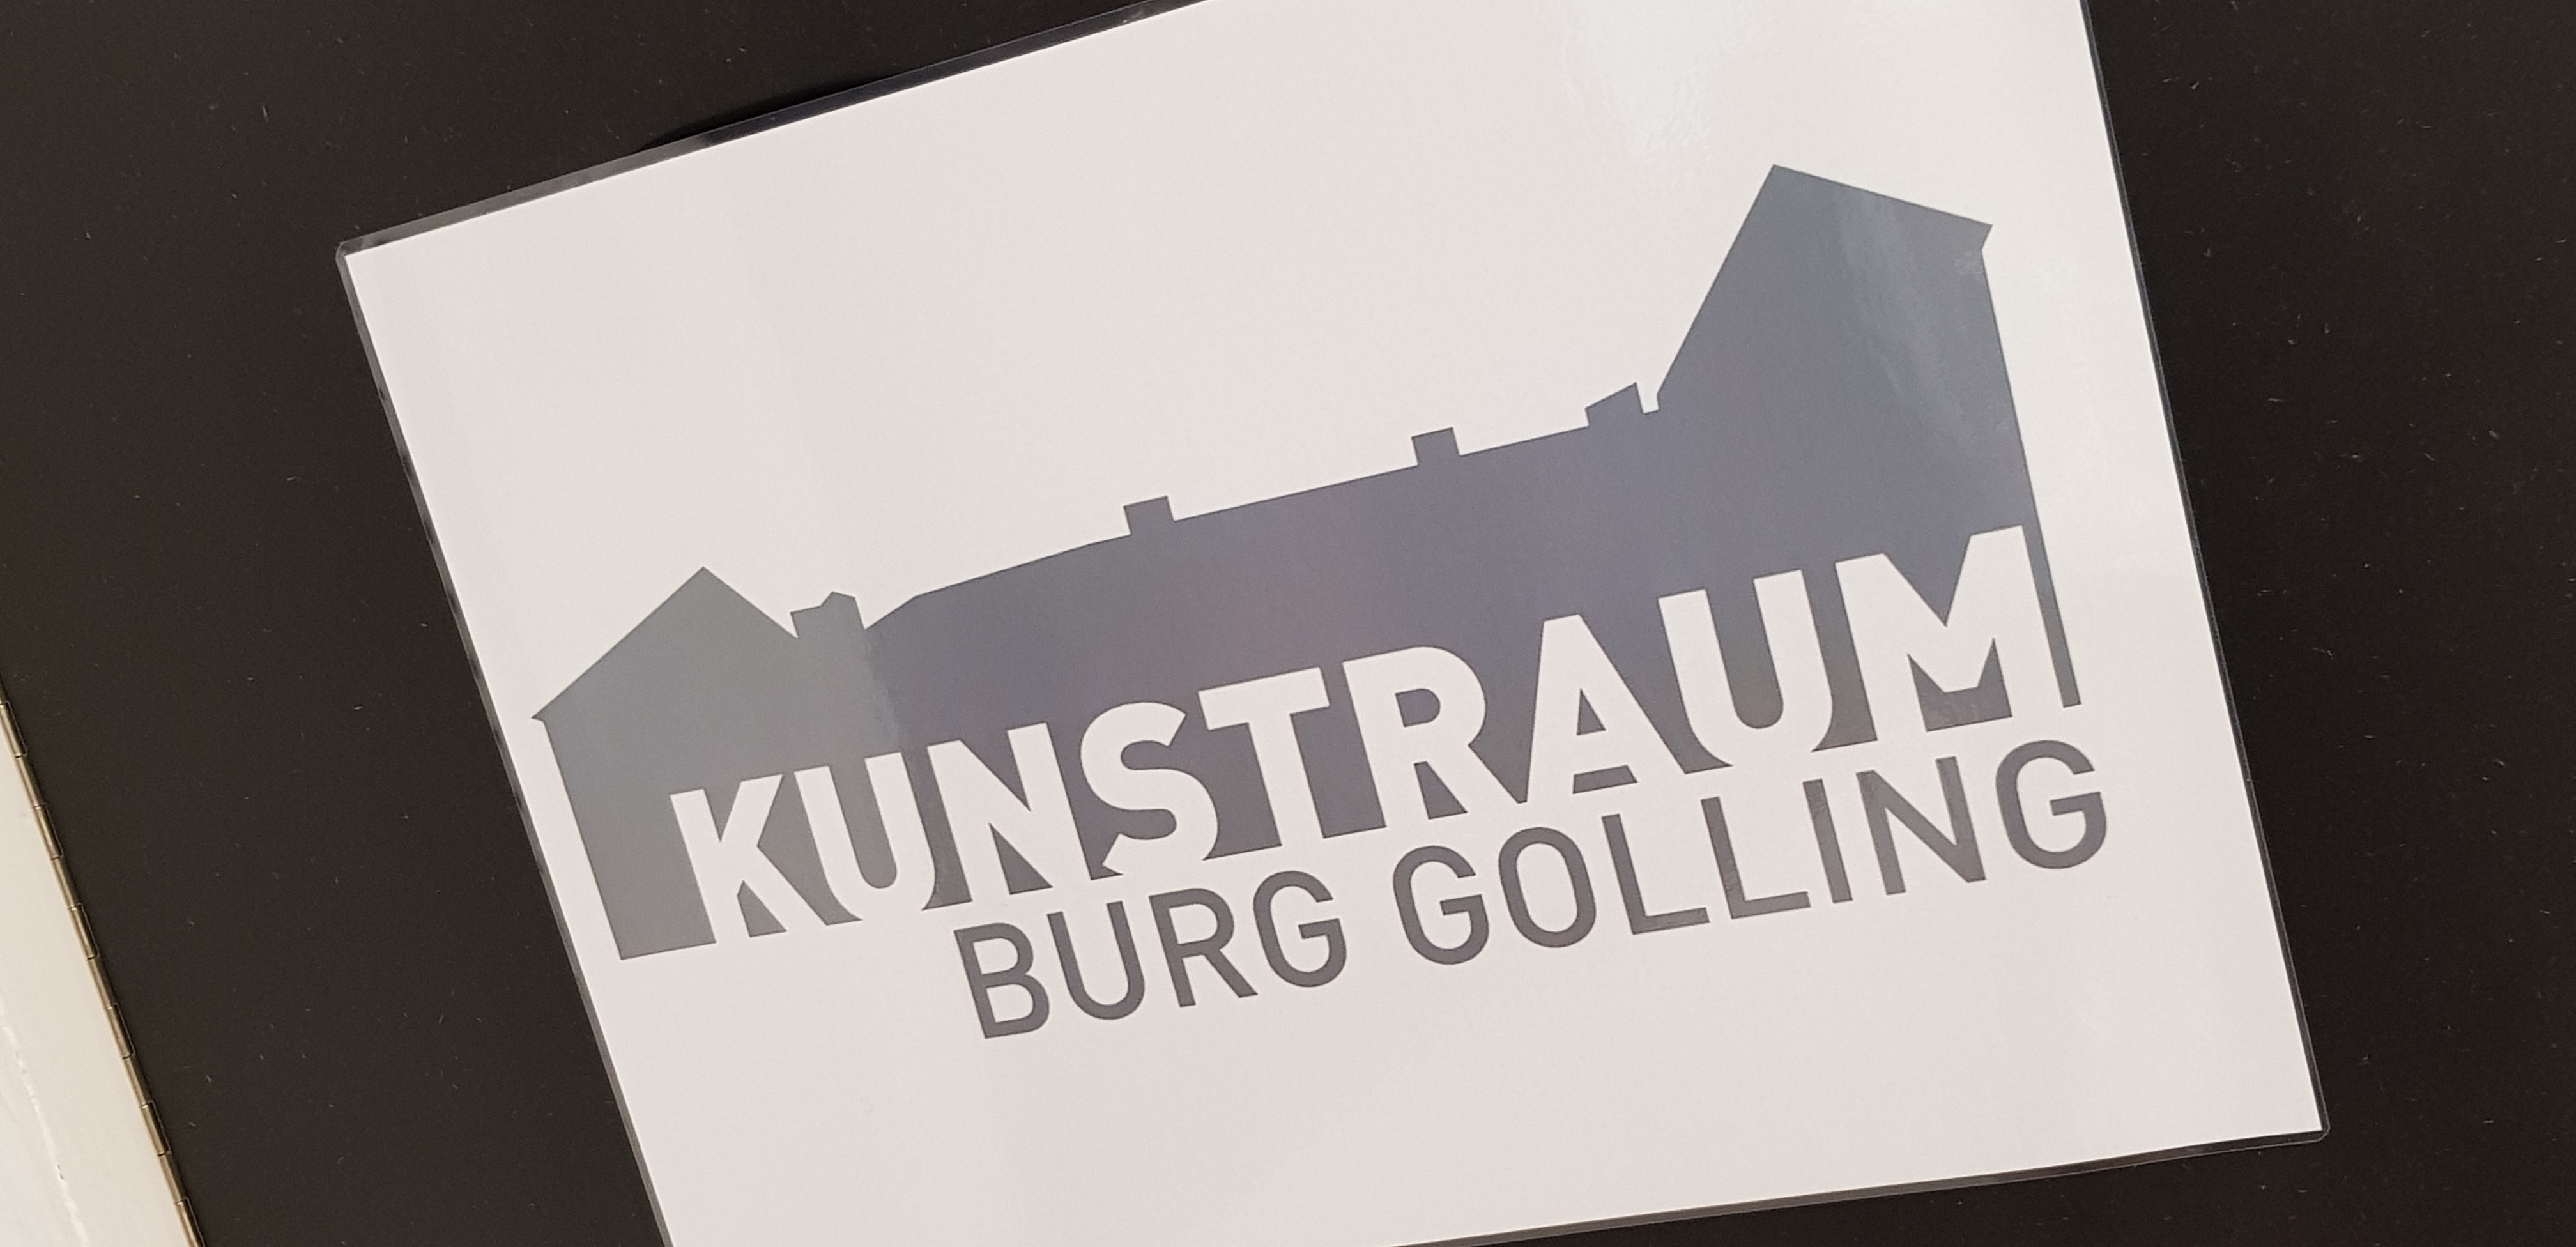 ABSTRACT NOW – Kunstraum Burg Golling